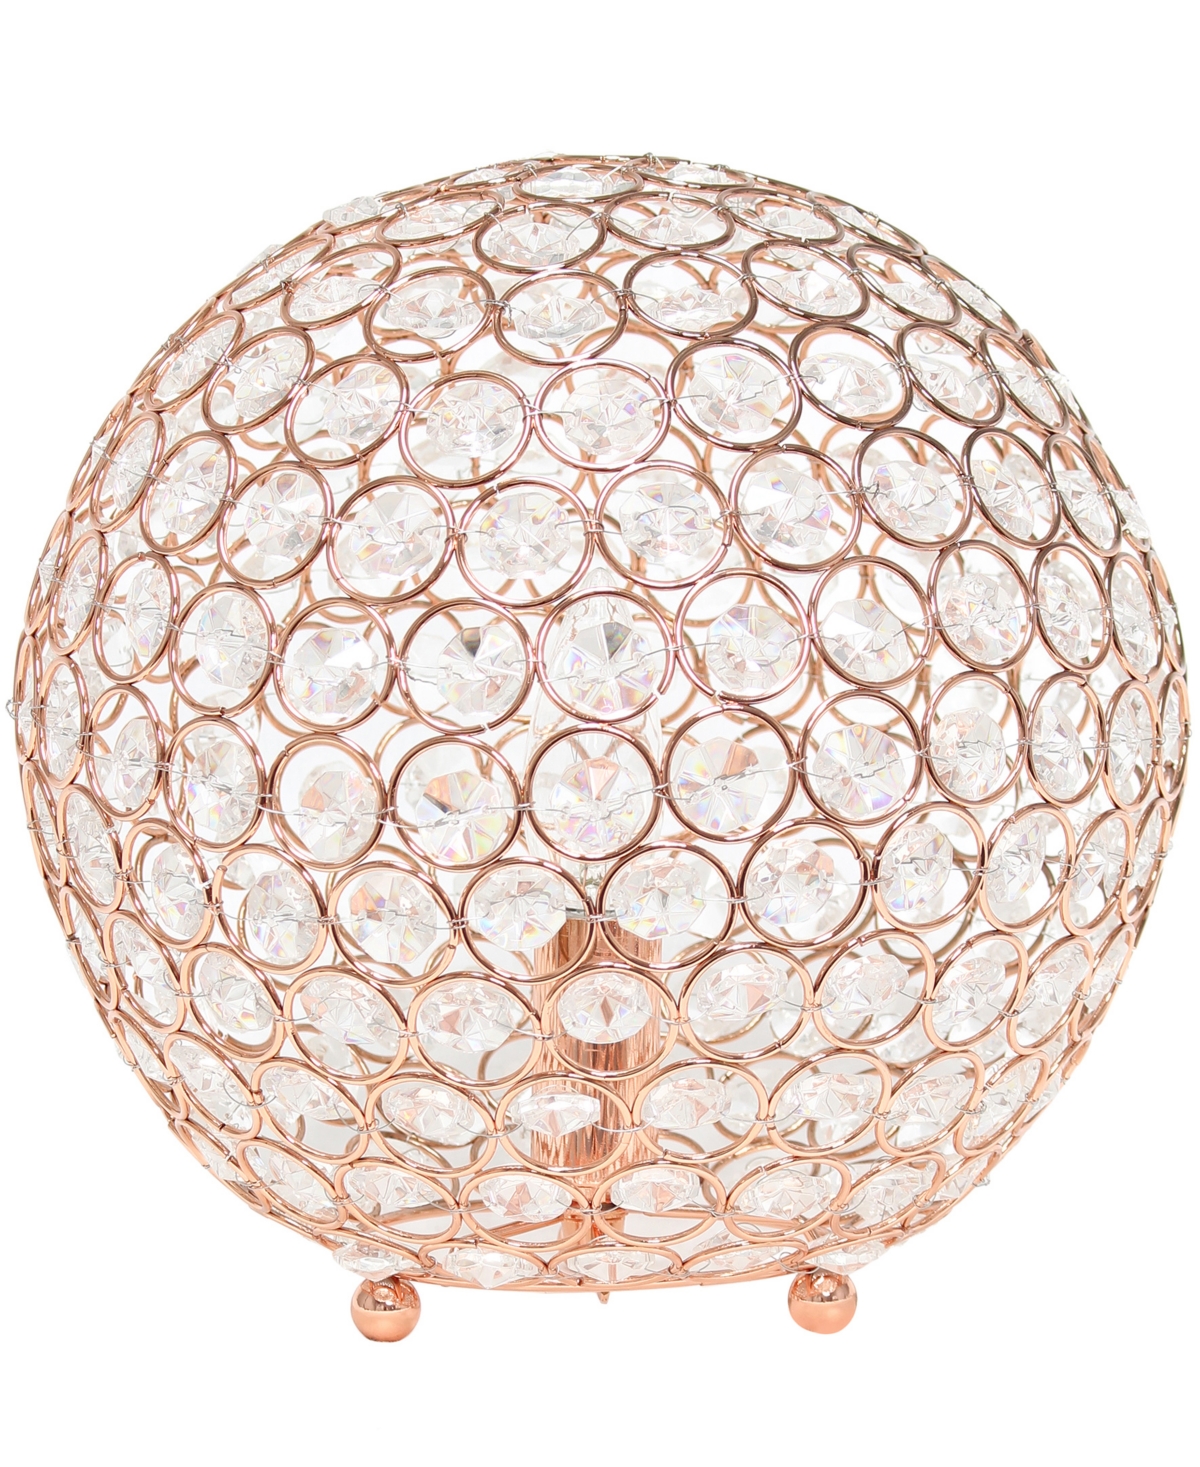 All The Rages Lalia Home Elipse 10" Crystal Orb Table Lamp In Rose Gold